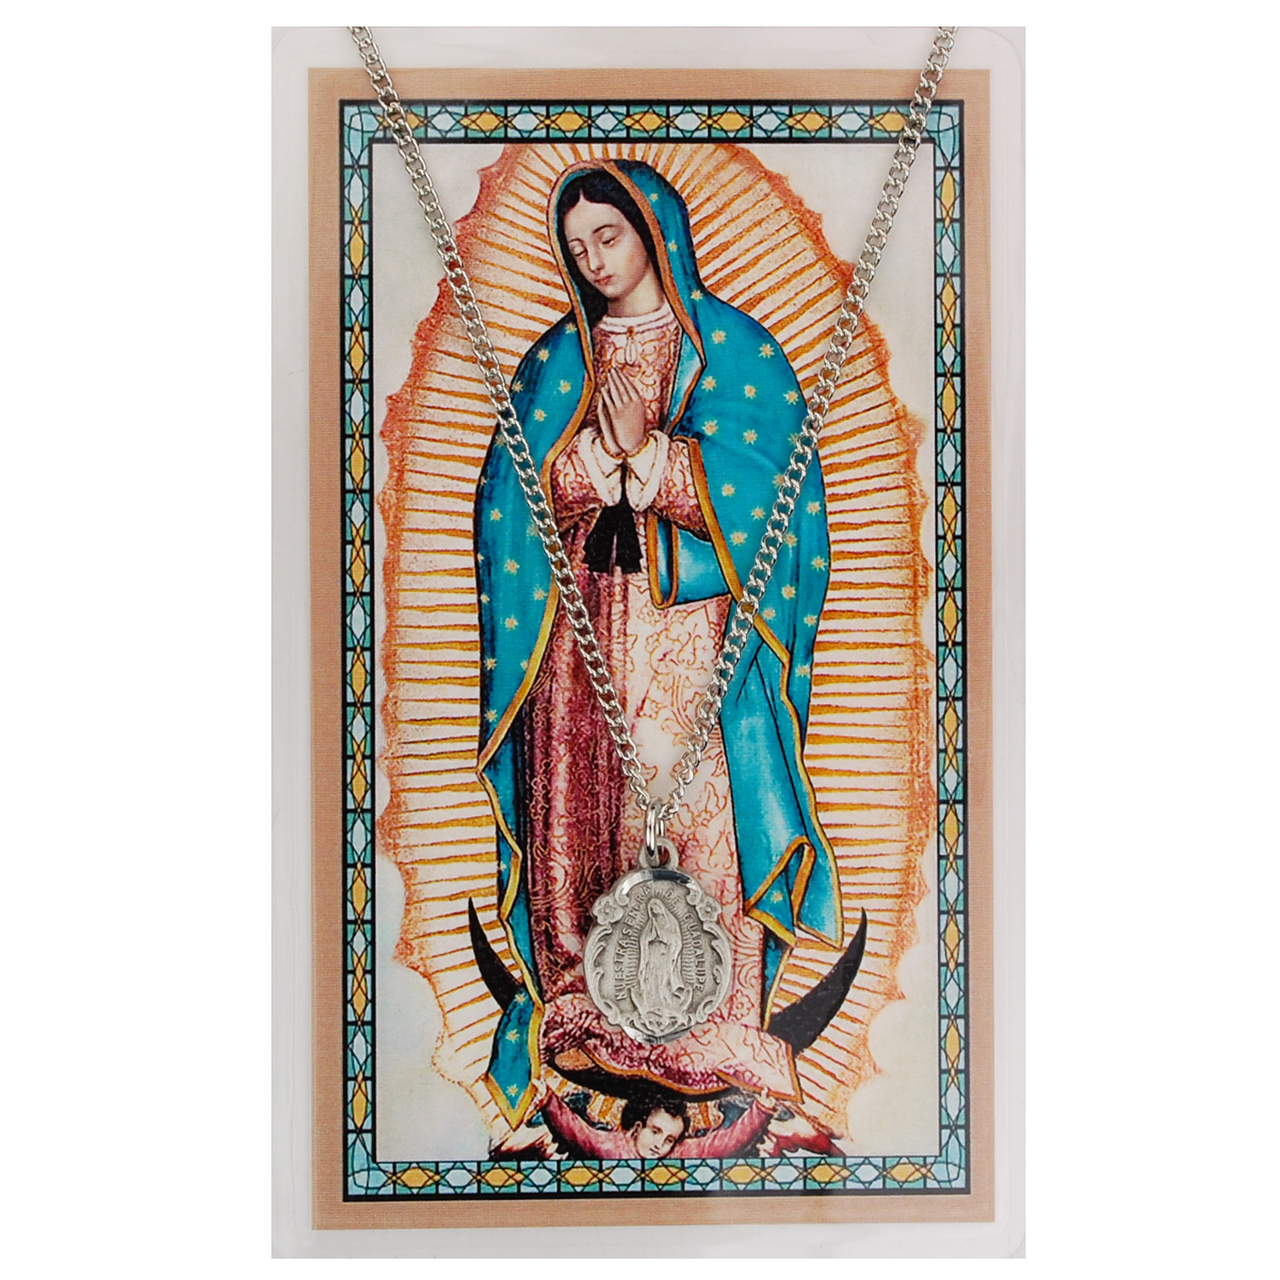 24'' Our Lady of Guadalupe Holy Card & Pendant